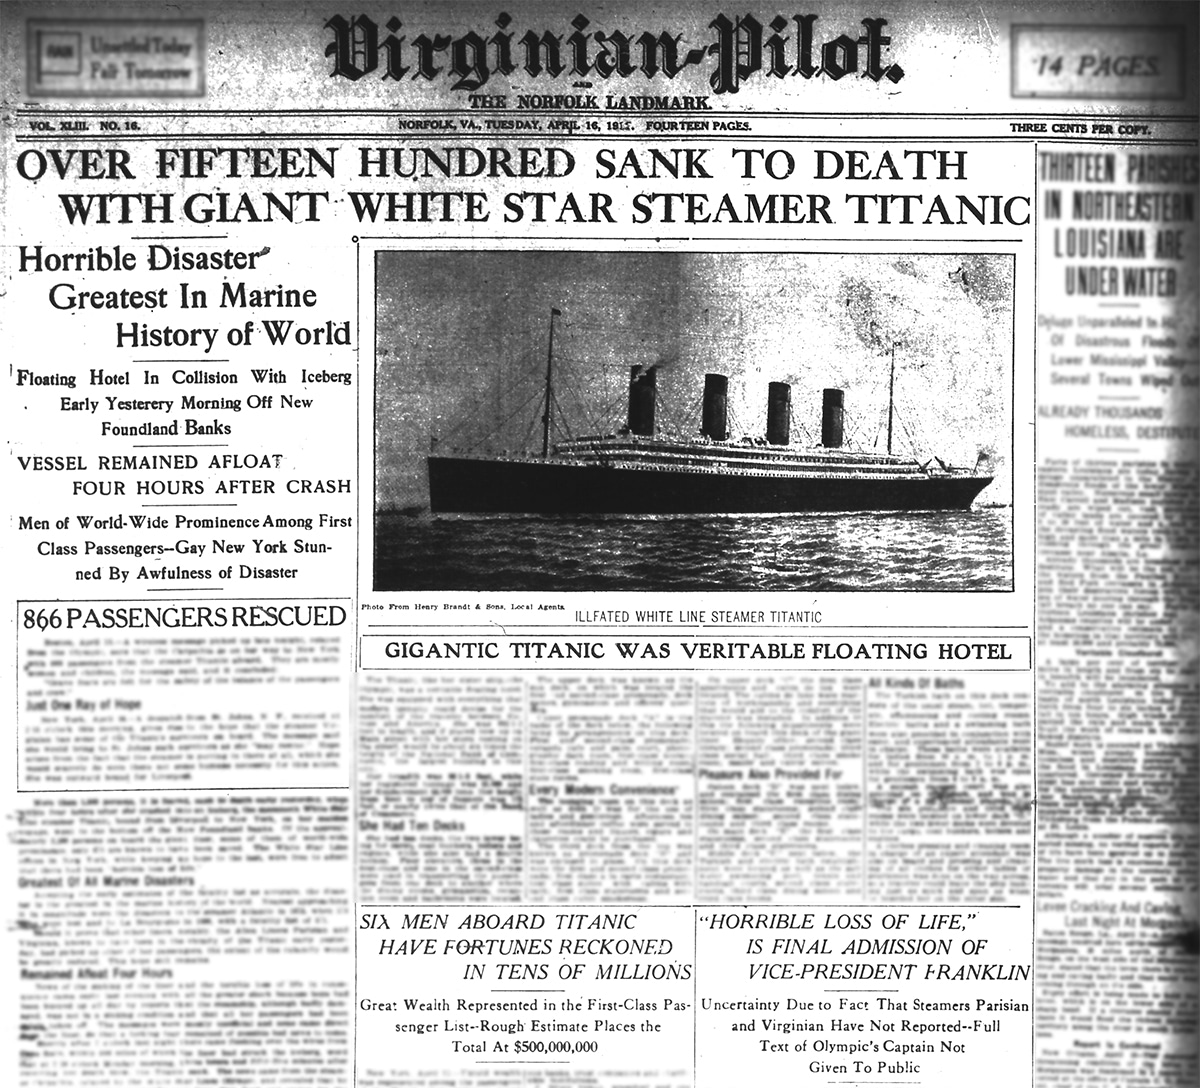 Titanic in Black and White - Headlines: Both Informative and Inaccurate ...